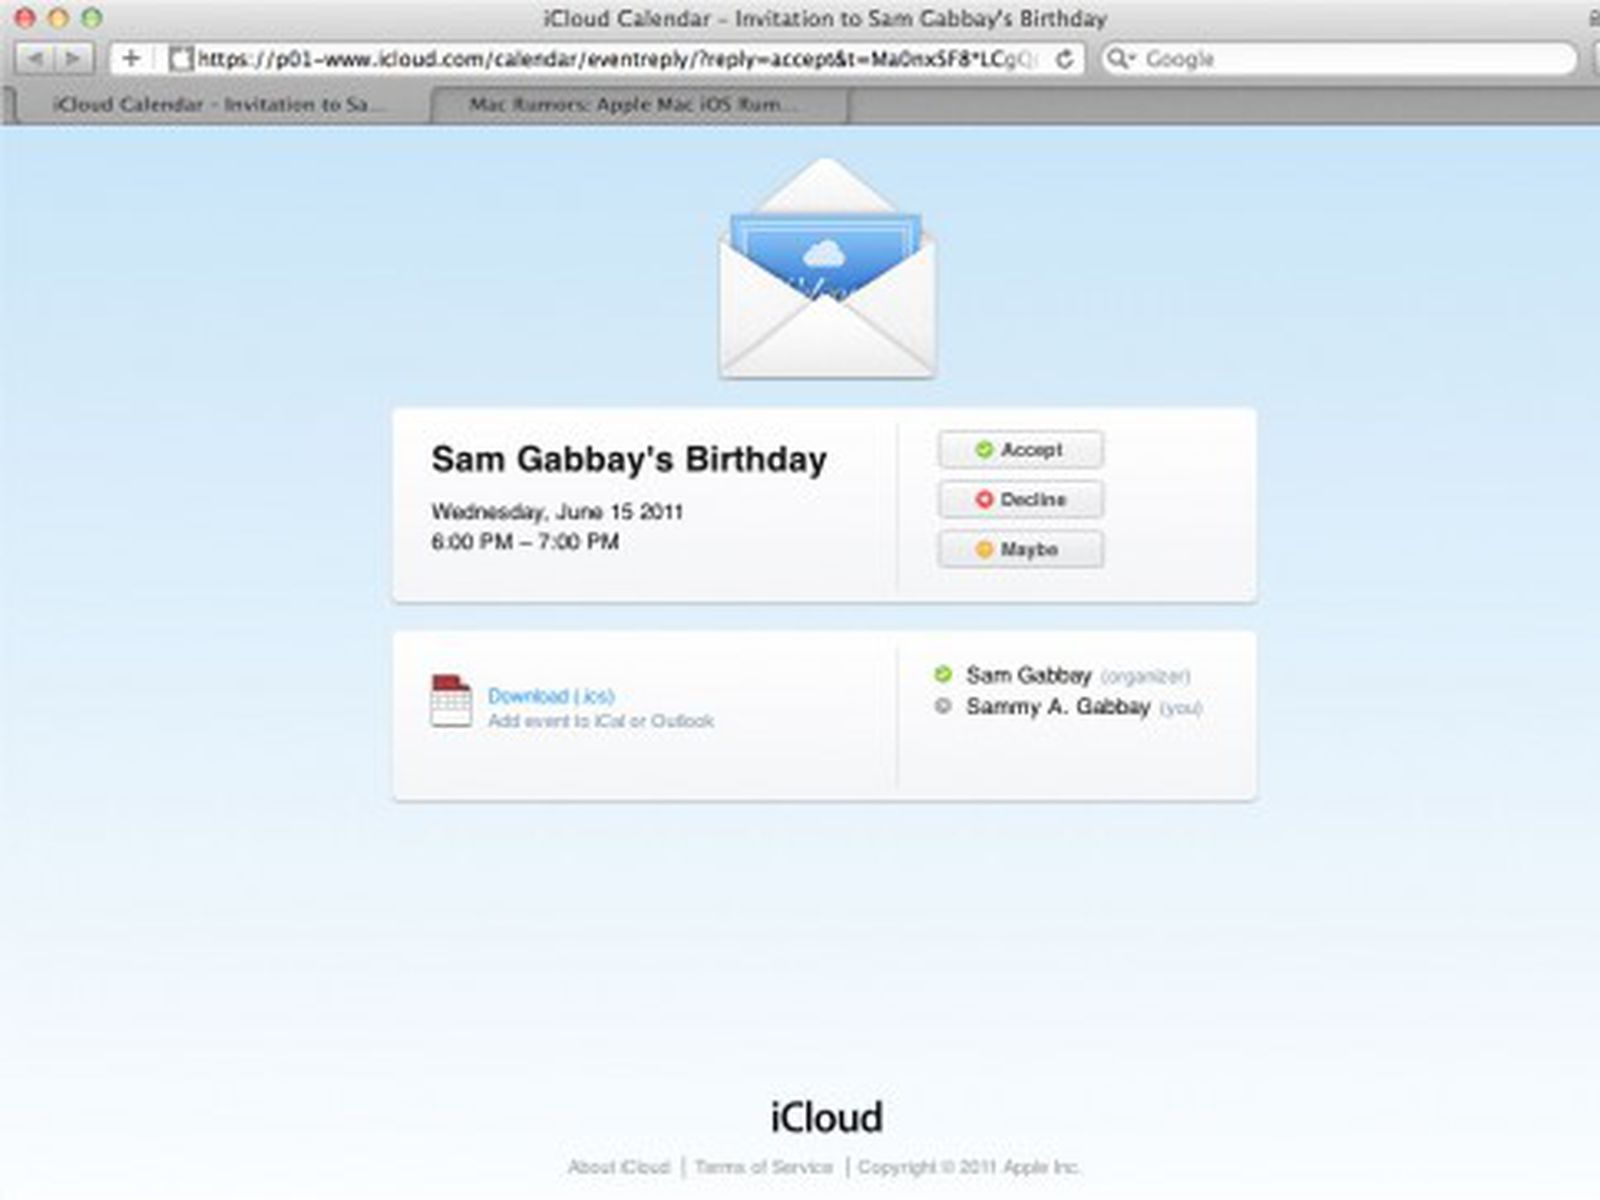 Apple Working on Redesigned iCloud Mail for Web - MacRumors